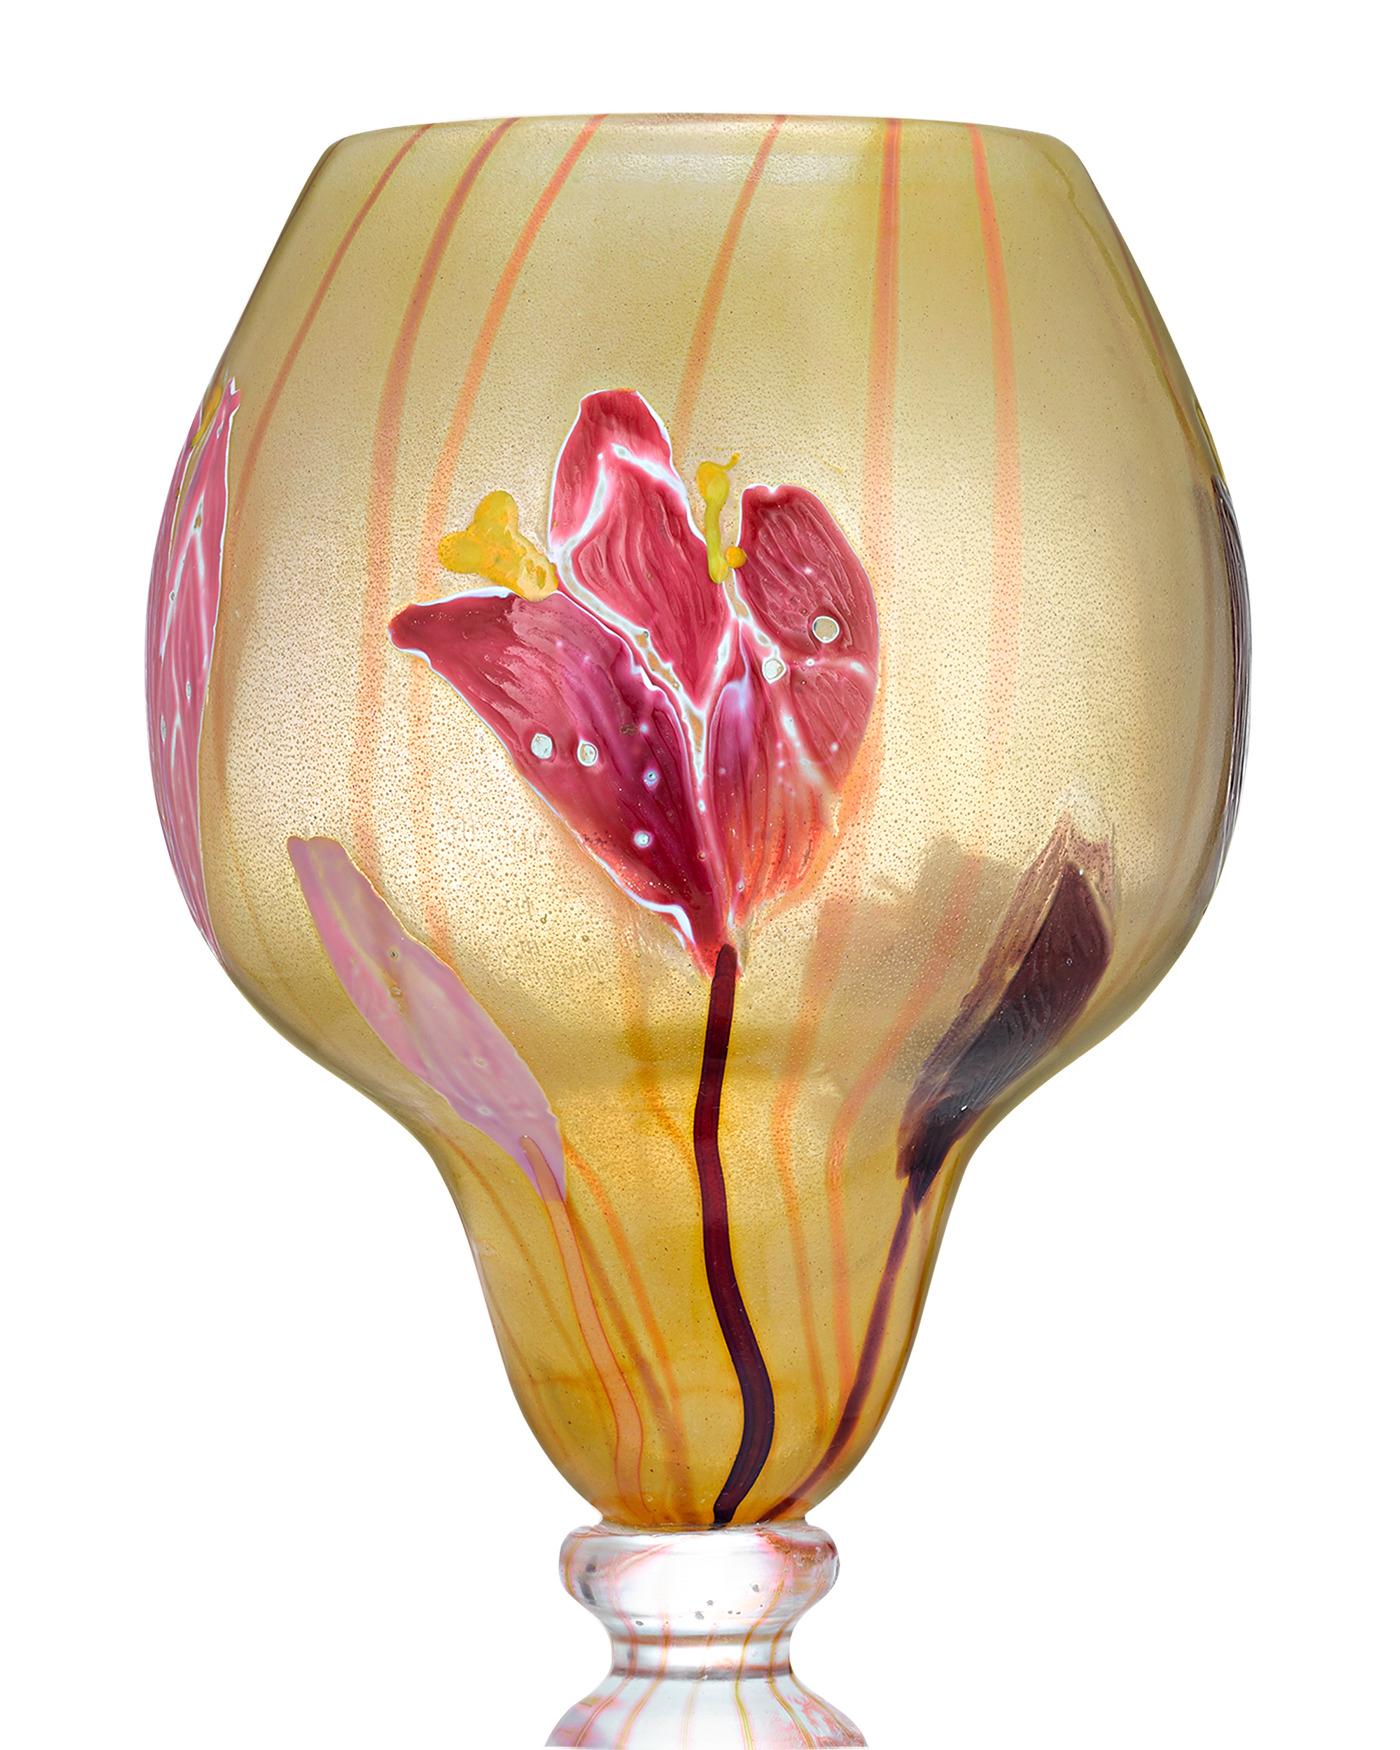 This immensely rare art glass vase by Émile Gallé was created for and exhibited at the great Paris Exhibition Universelle of 1900. Entirely hand-crafted, the exquisite piece is a testament to Gallé's mastery of this delicate art form, particularly